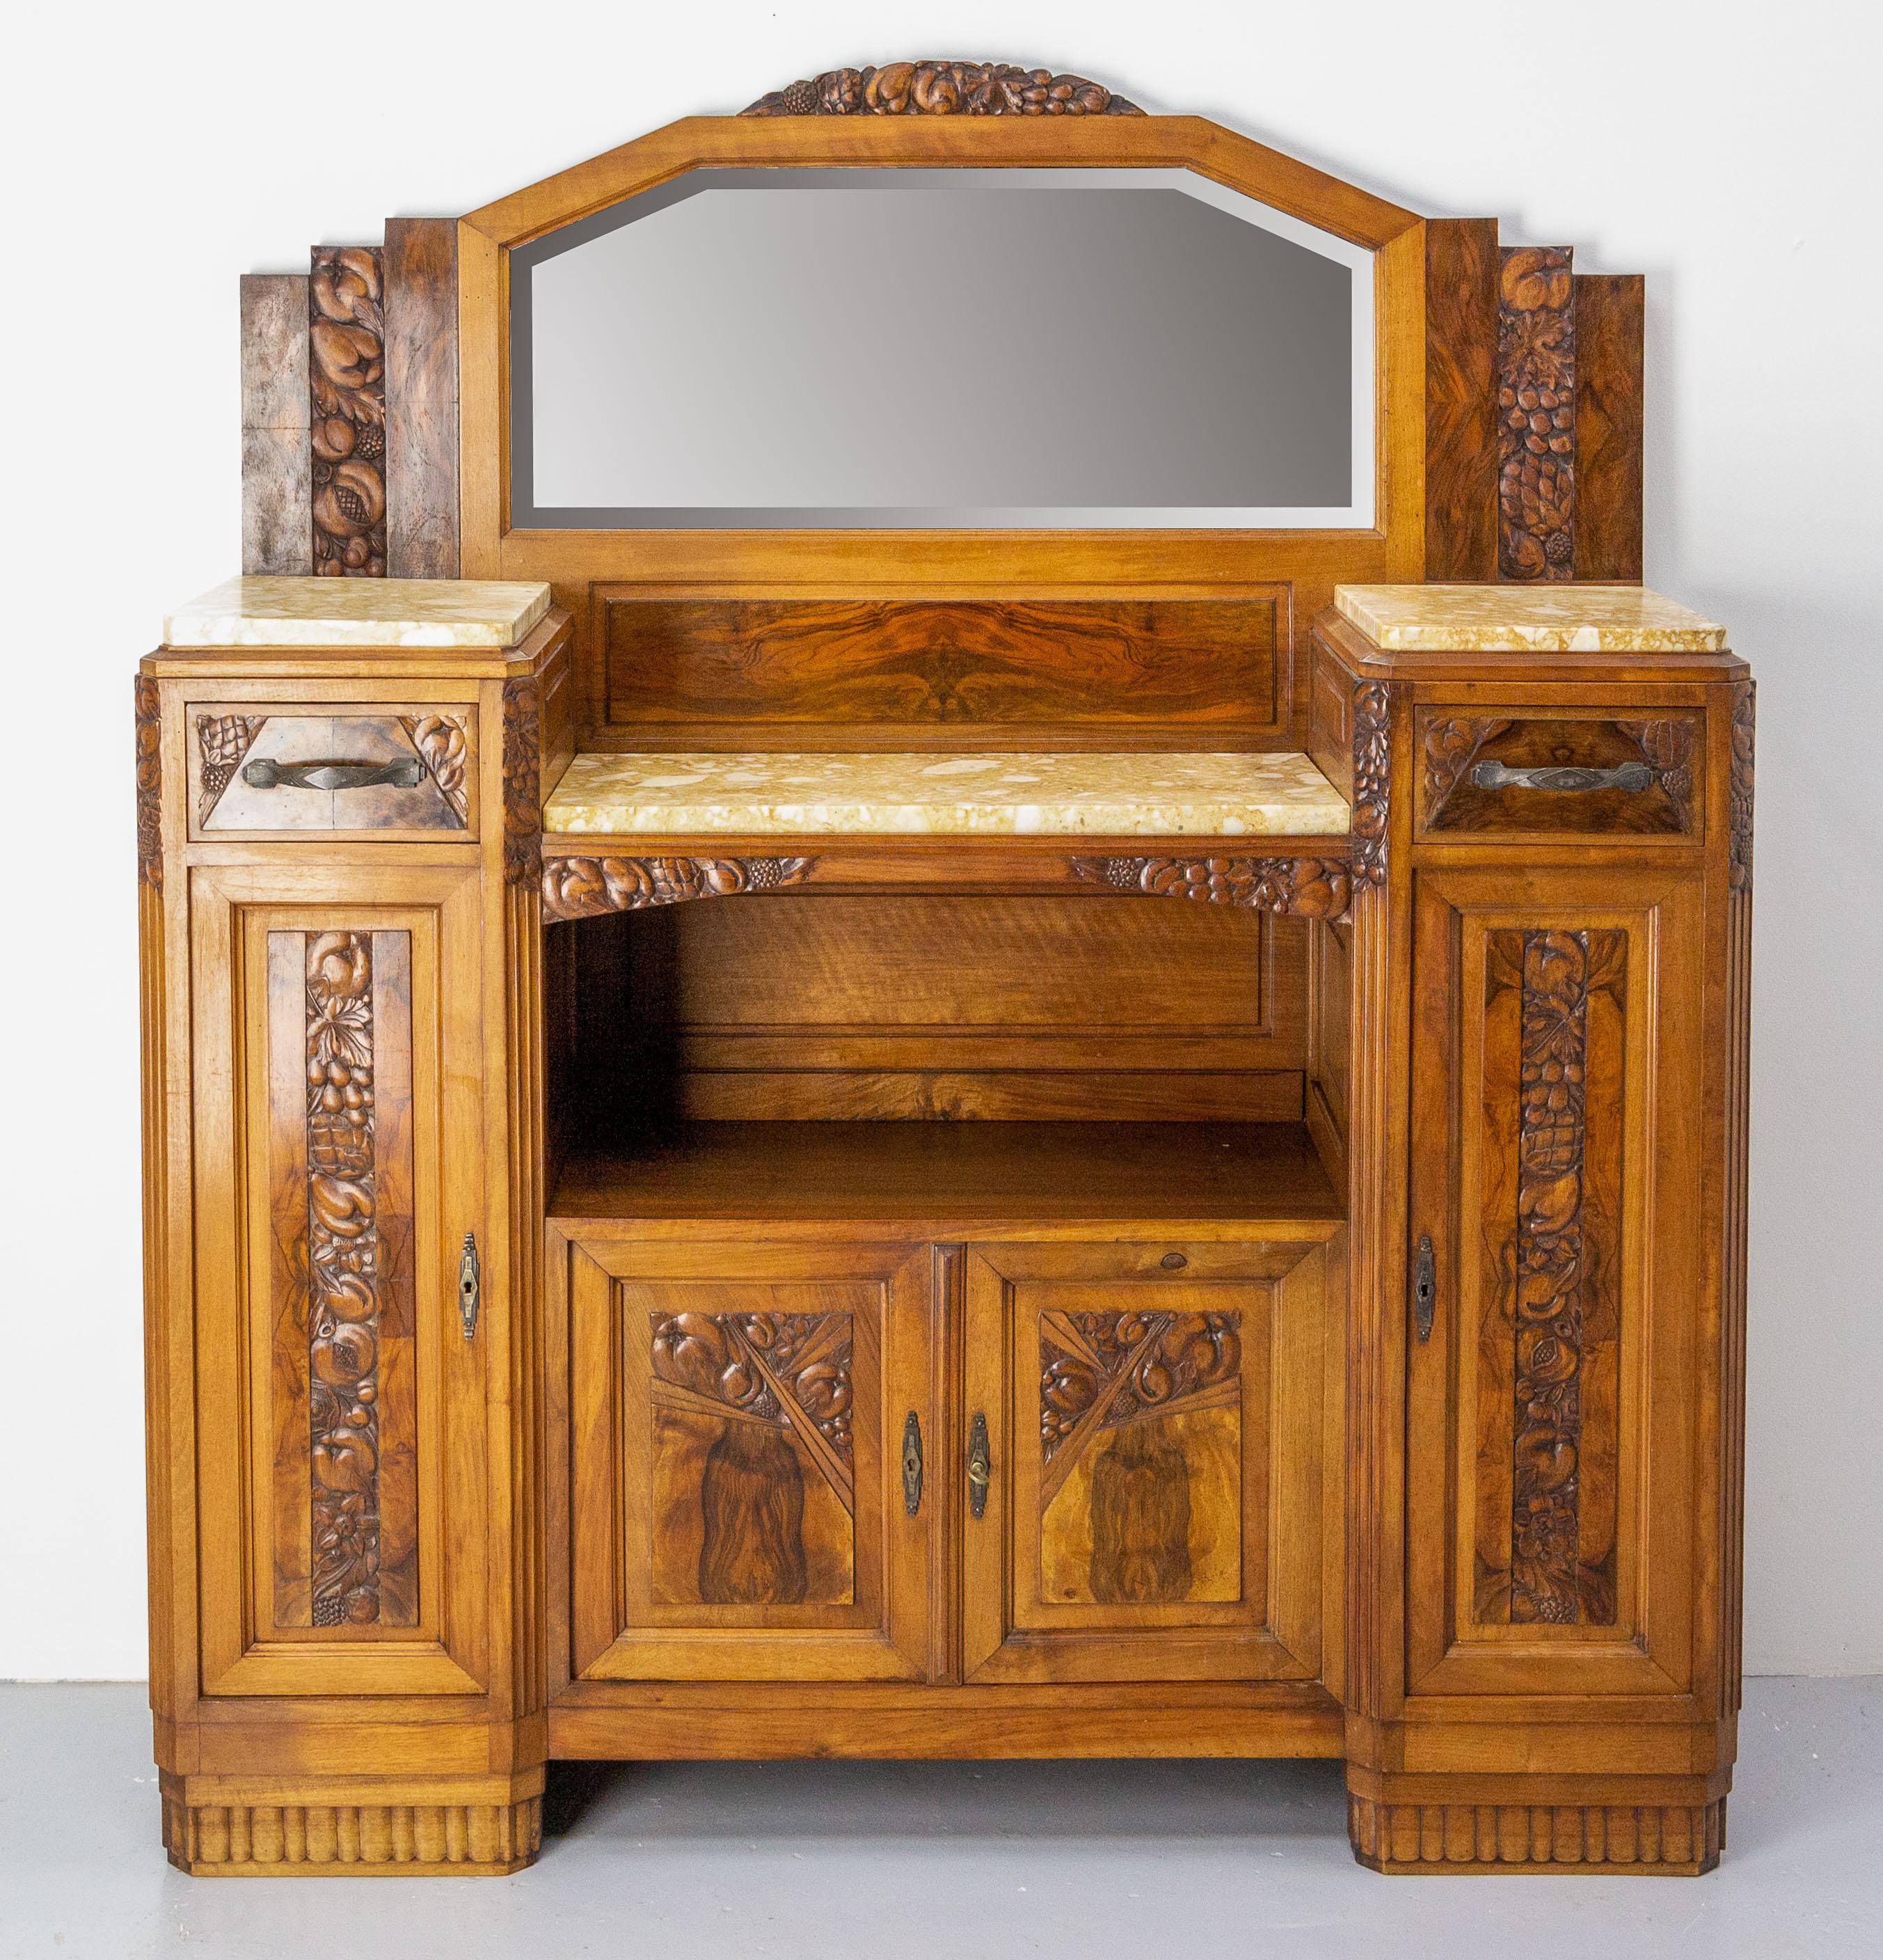 Cabinet Art Deco, French, circa 1930.
Credenza buffet walnut and marble with bas-reliefs on the theme of fruits.
Four doors and two drawers.
The buffet has been made in three parts. 
The tops are recovered of yellow marble.
The mirror is